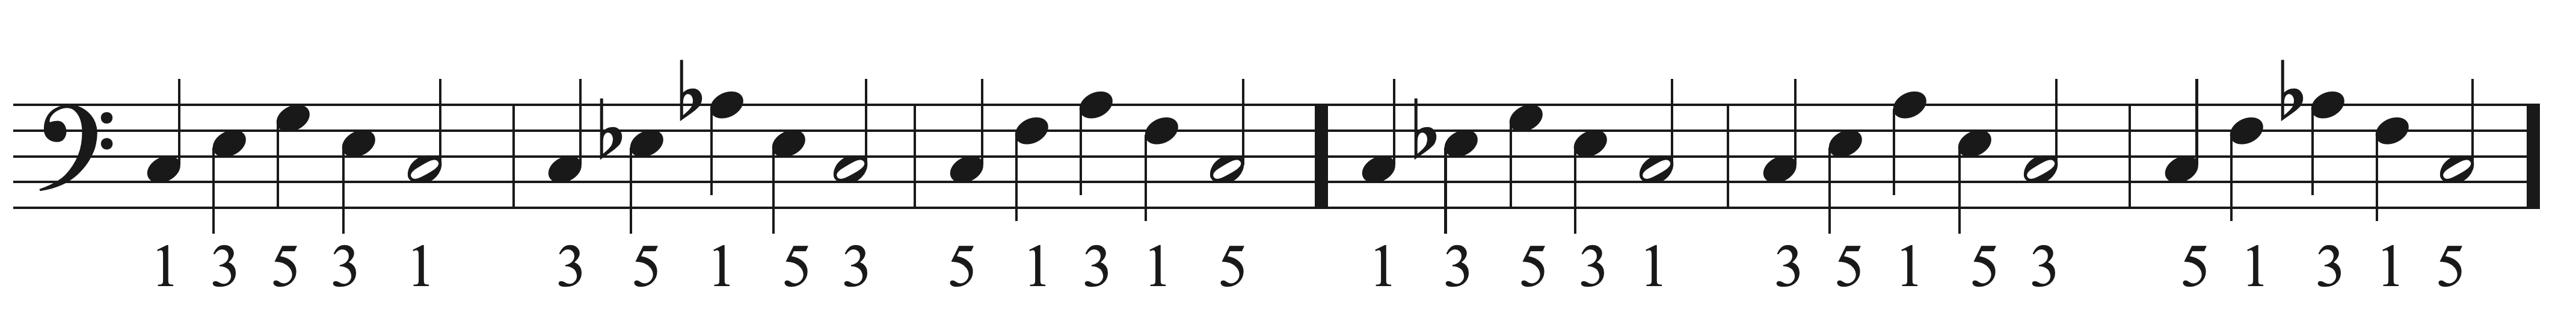 Triads and Inversions Sight Singing exercise example